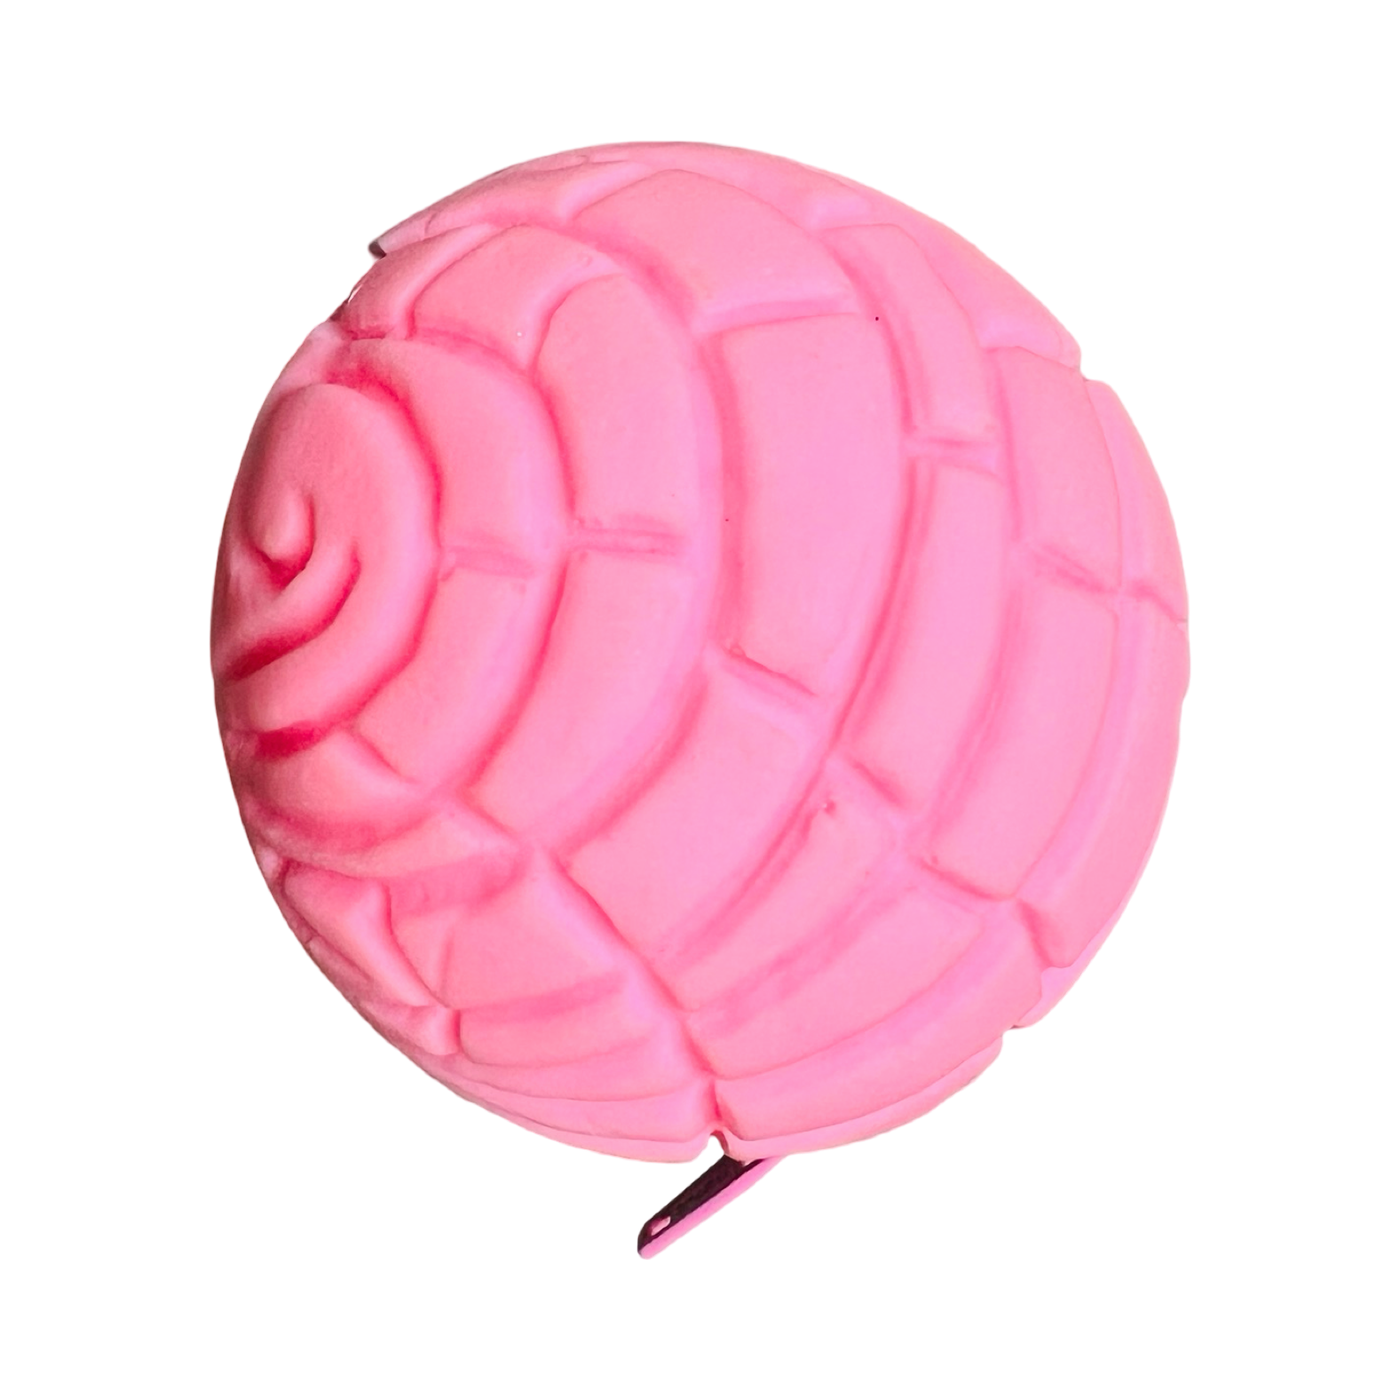 round rubber pink concha coin purse